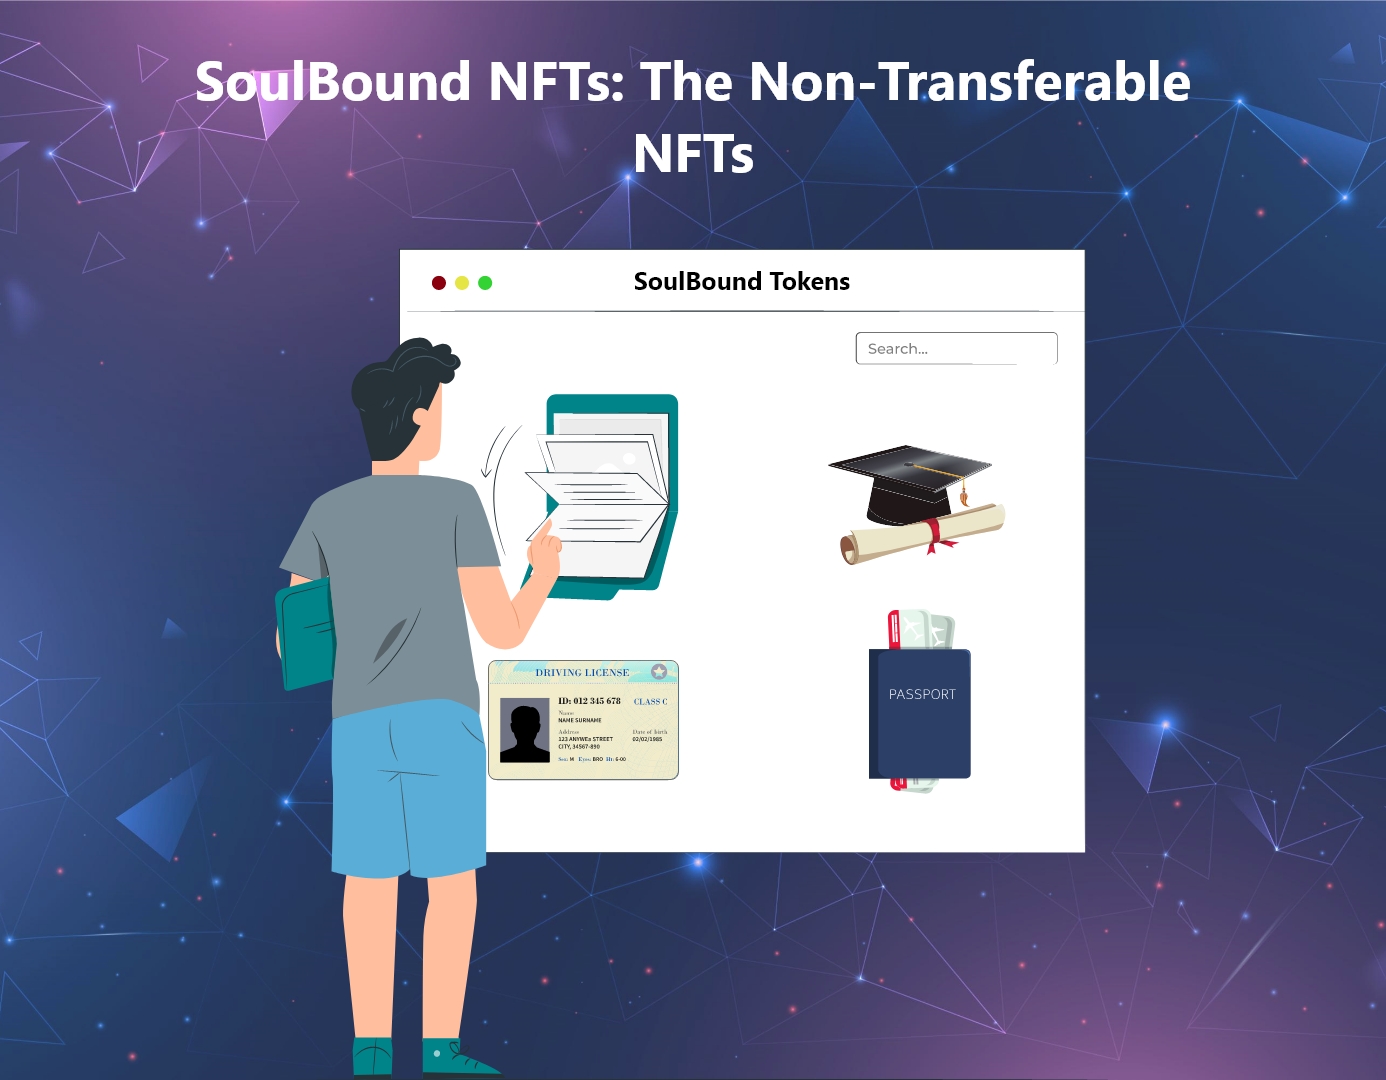 SoulBound NFTs: Non-Transferable Ownership and Achieves in the Blockchain Era